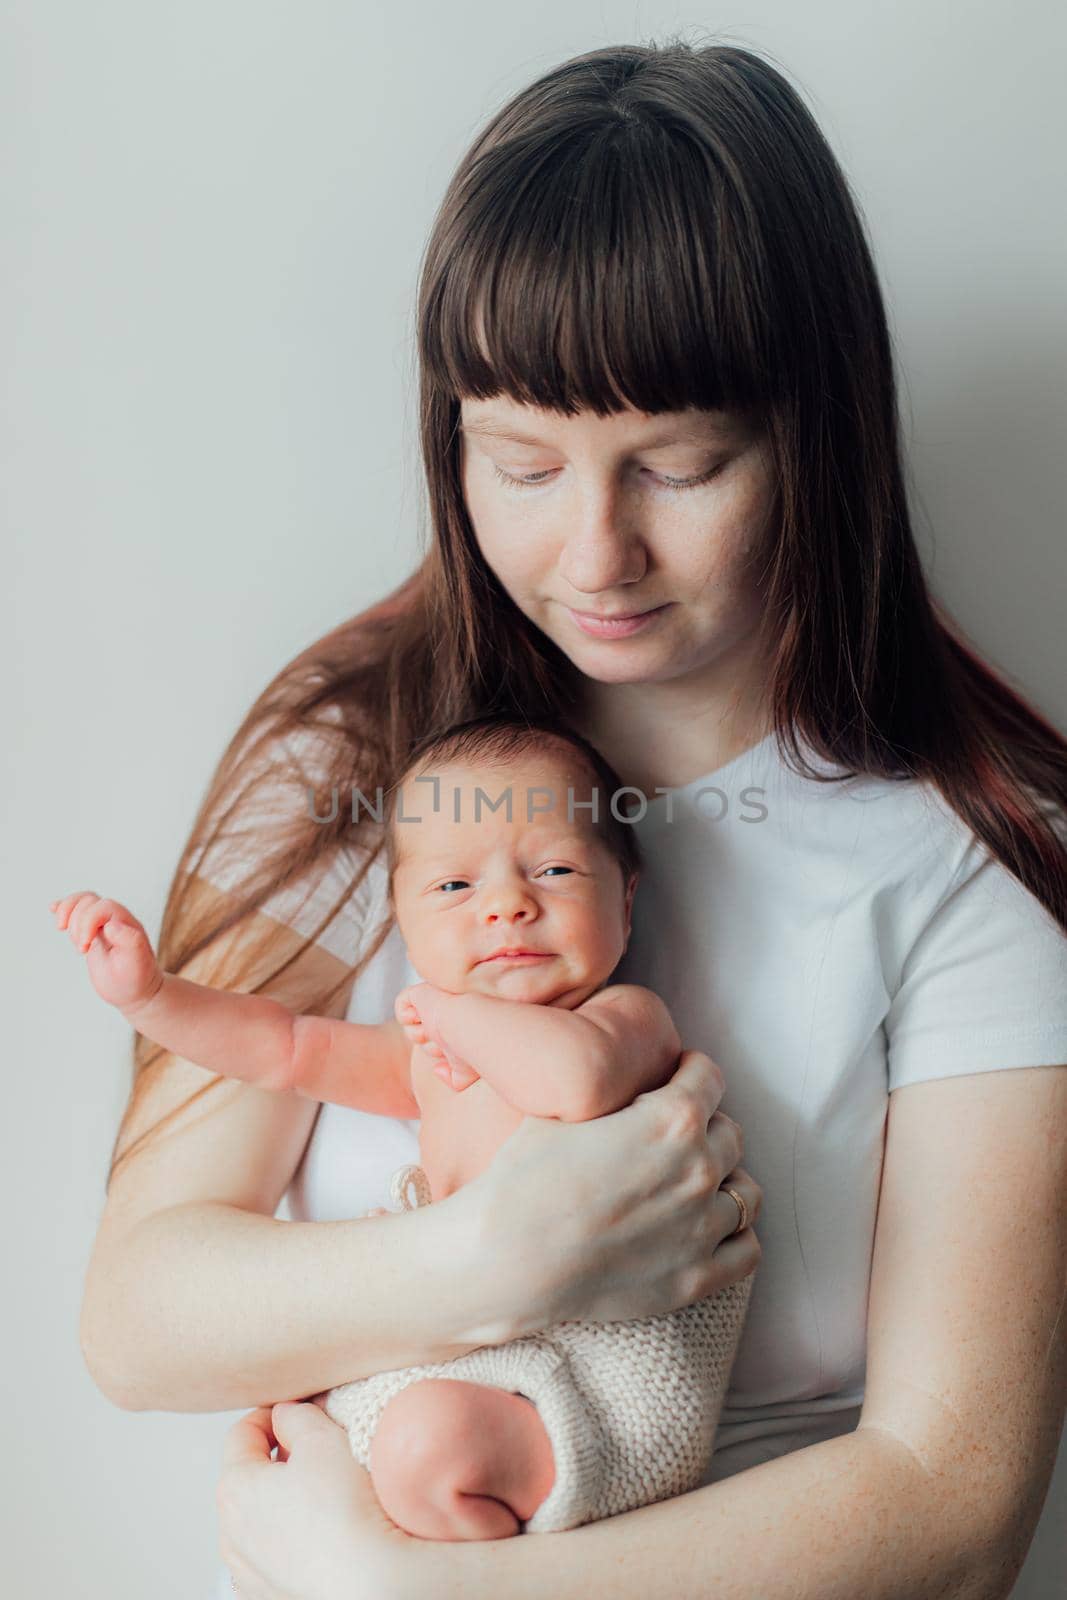 Mom holds the baby in her arms lifestyle . Mother's love for her son. A newborn baby. Mother and child relationship.